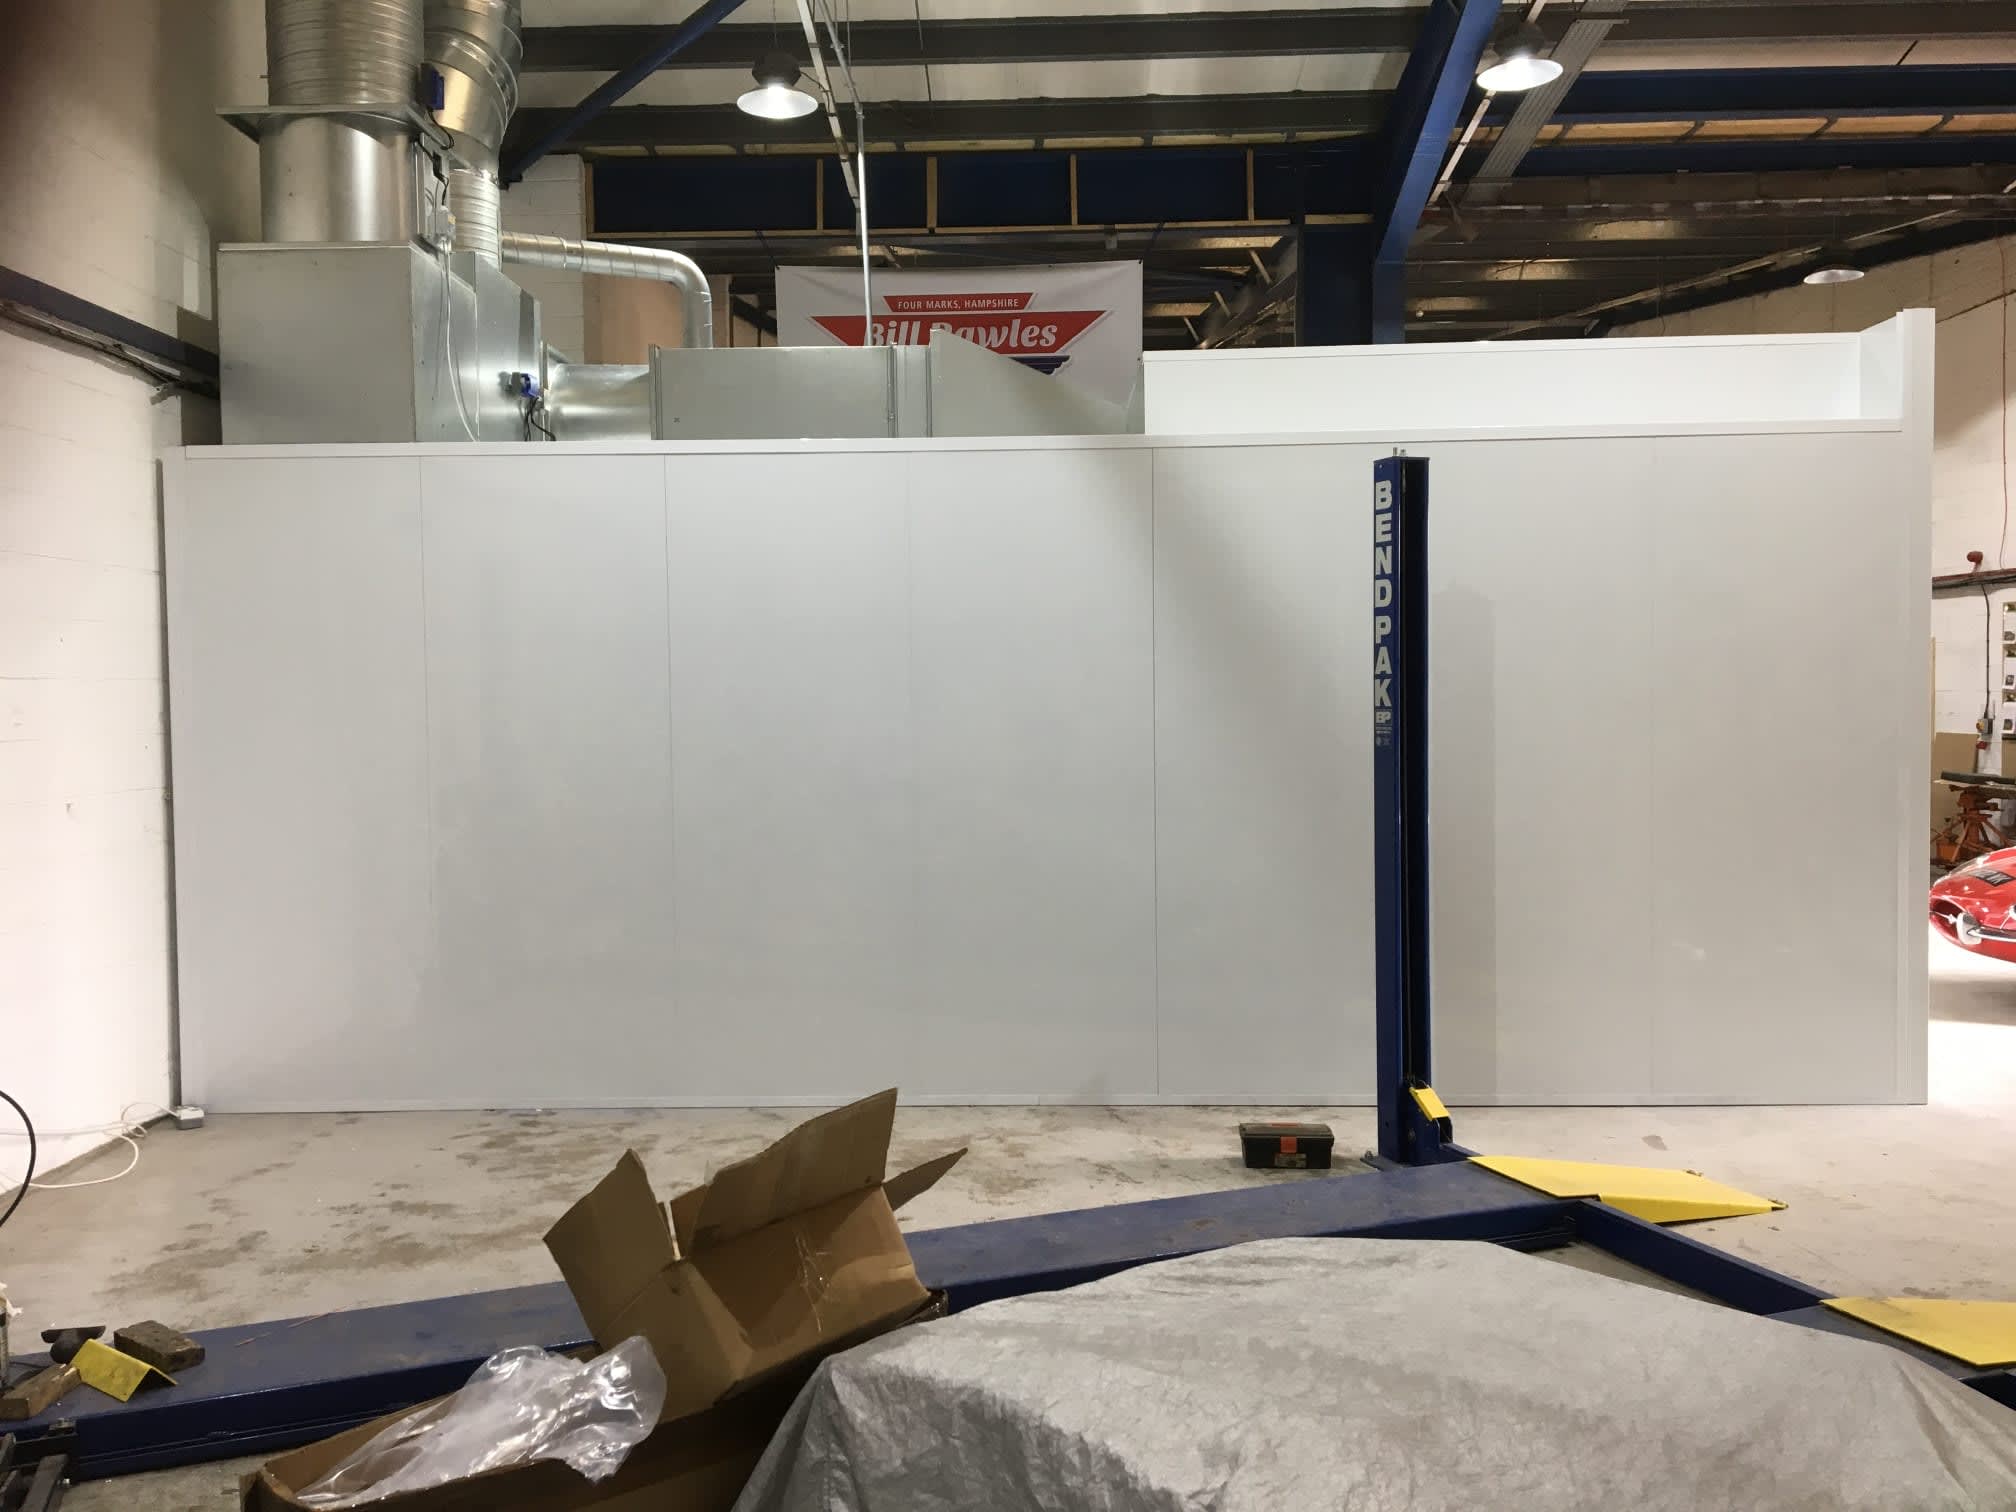 Images Reeve Spray Booths